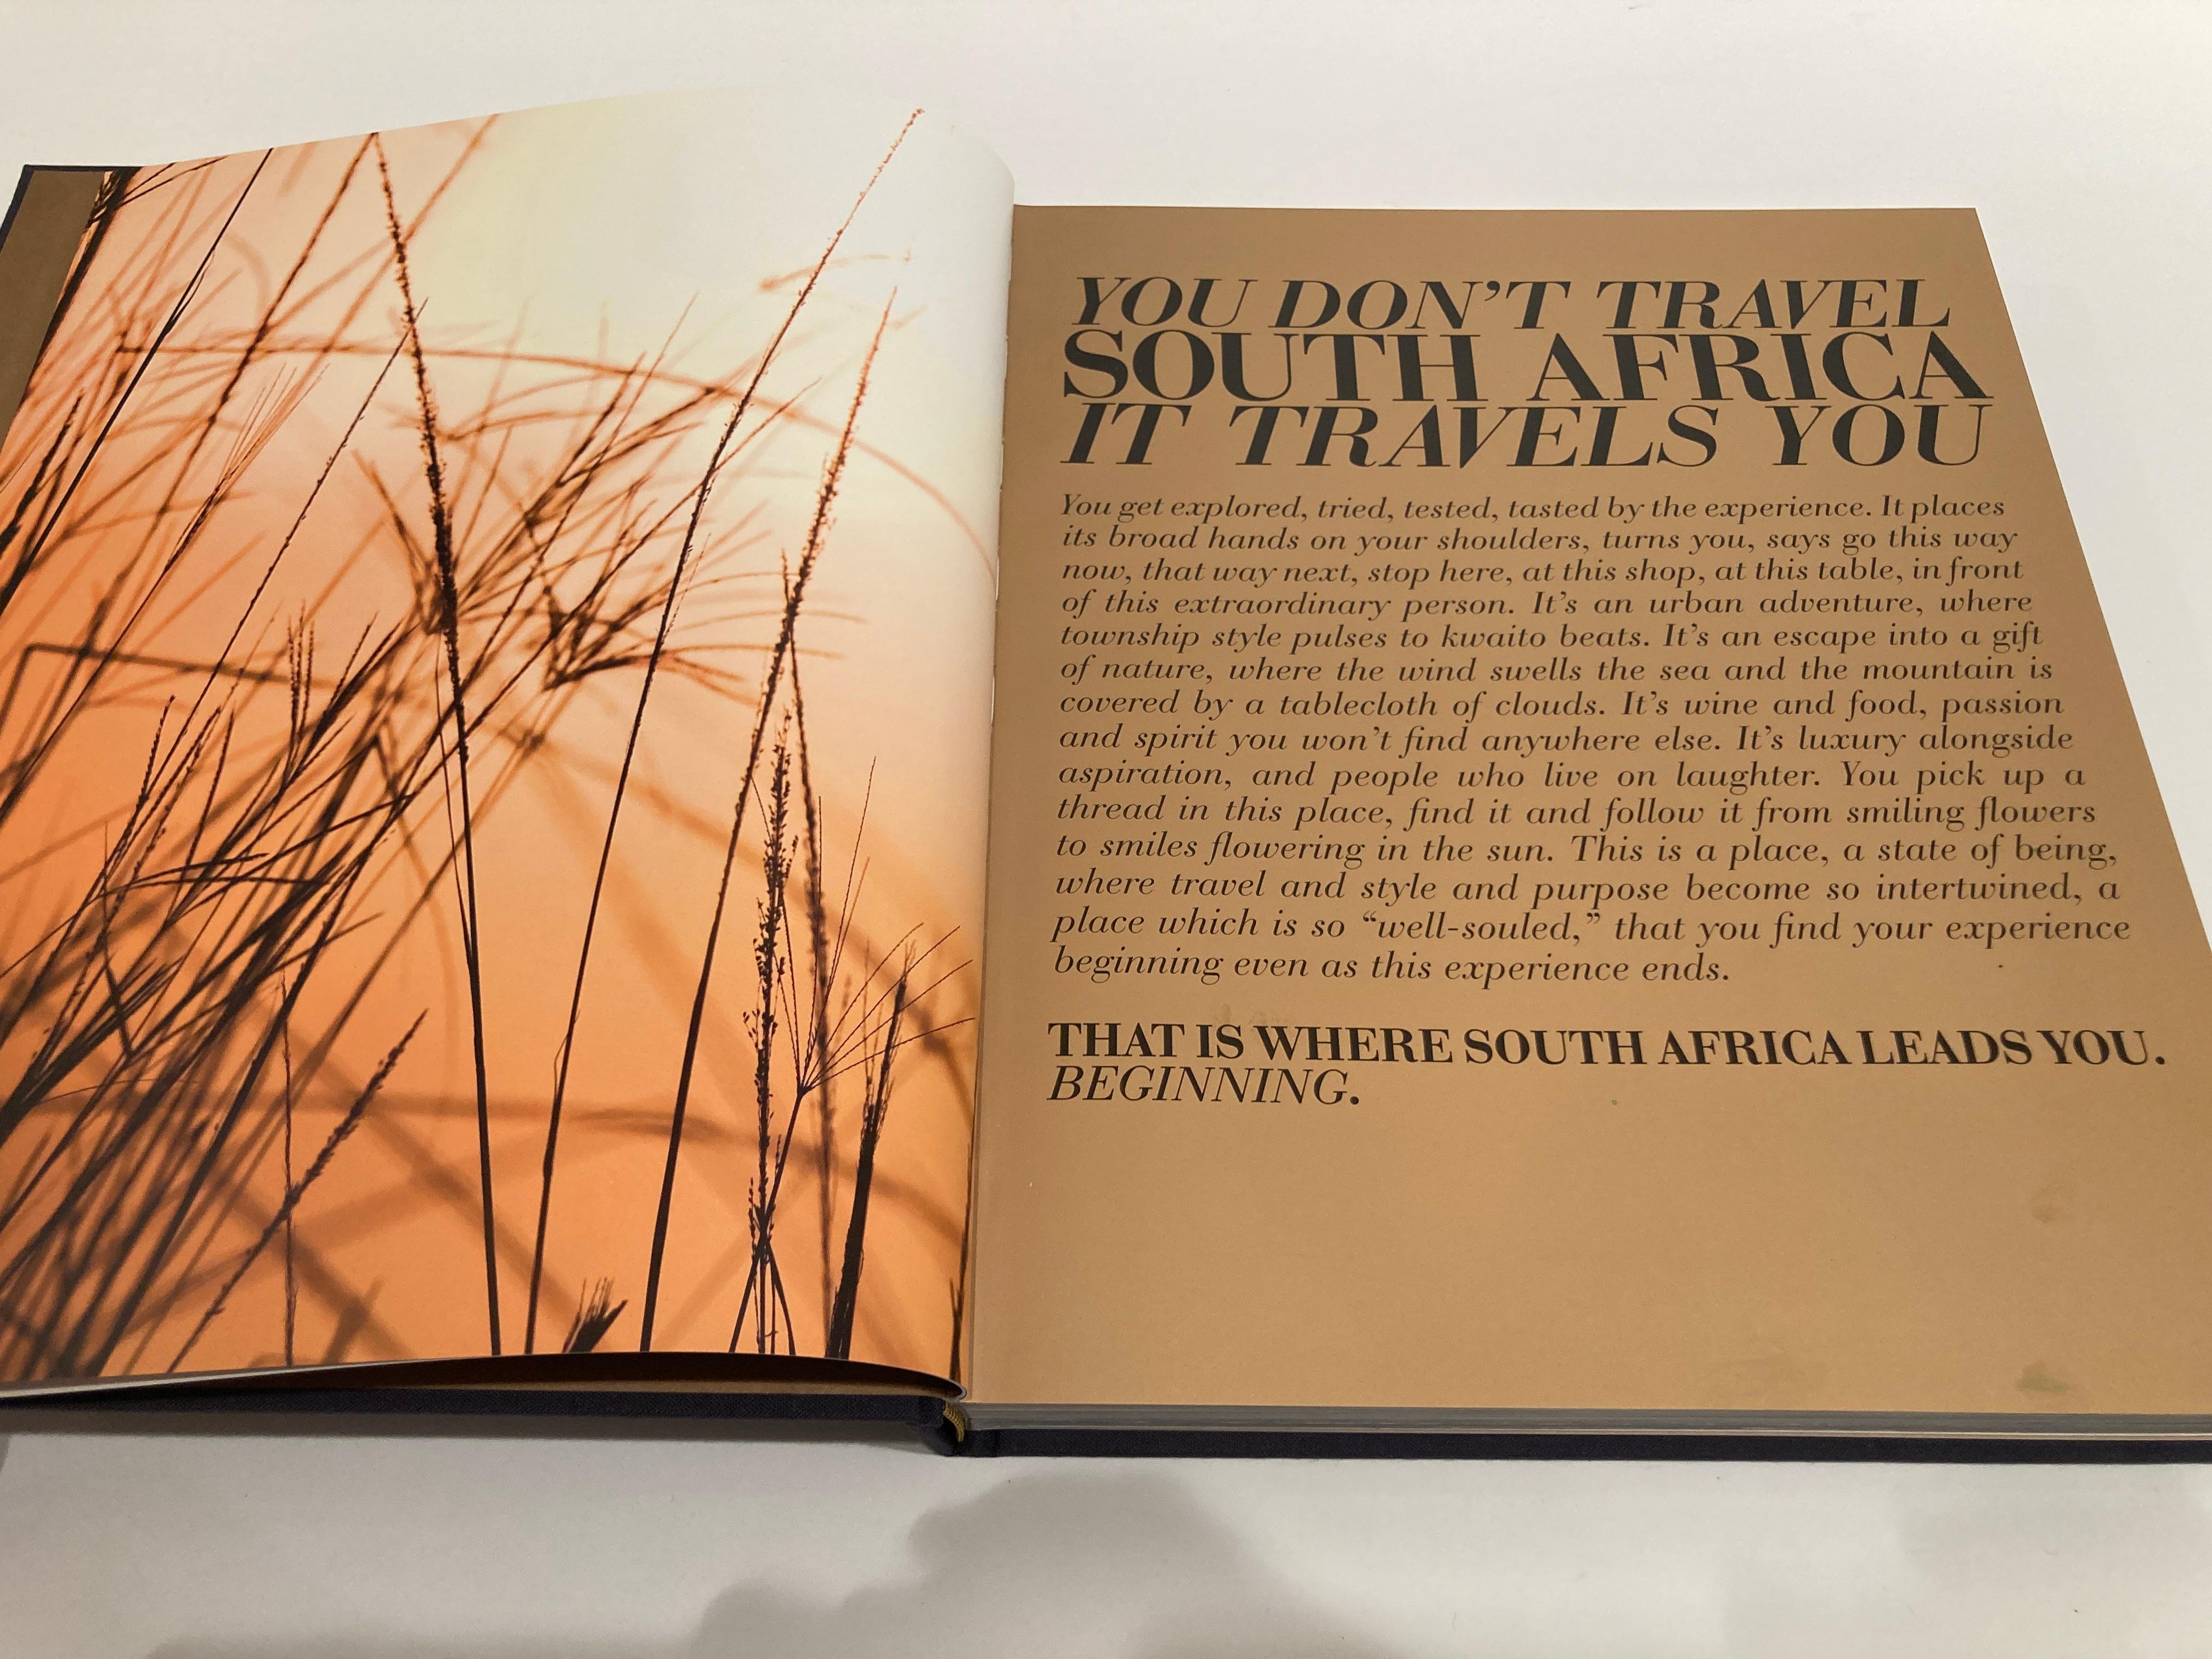 South Africa by Mital Shah, Photography by Mark Leibowitz and Gerald Forster 1